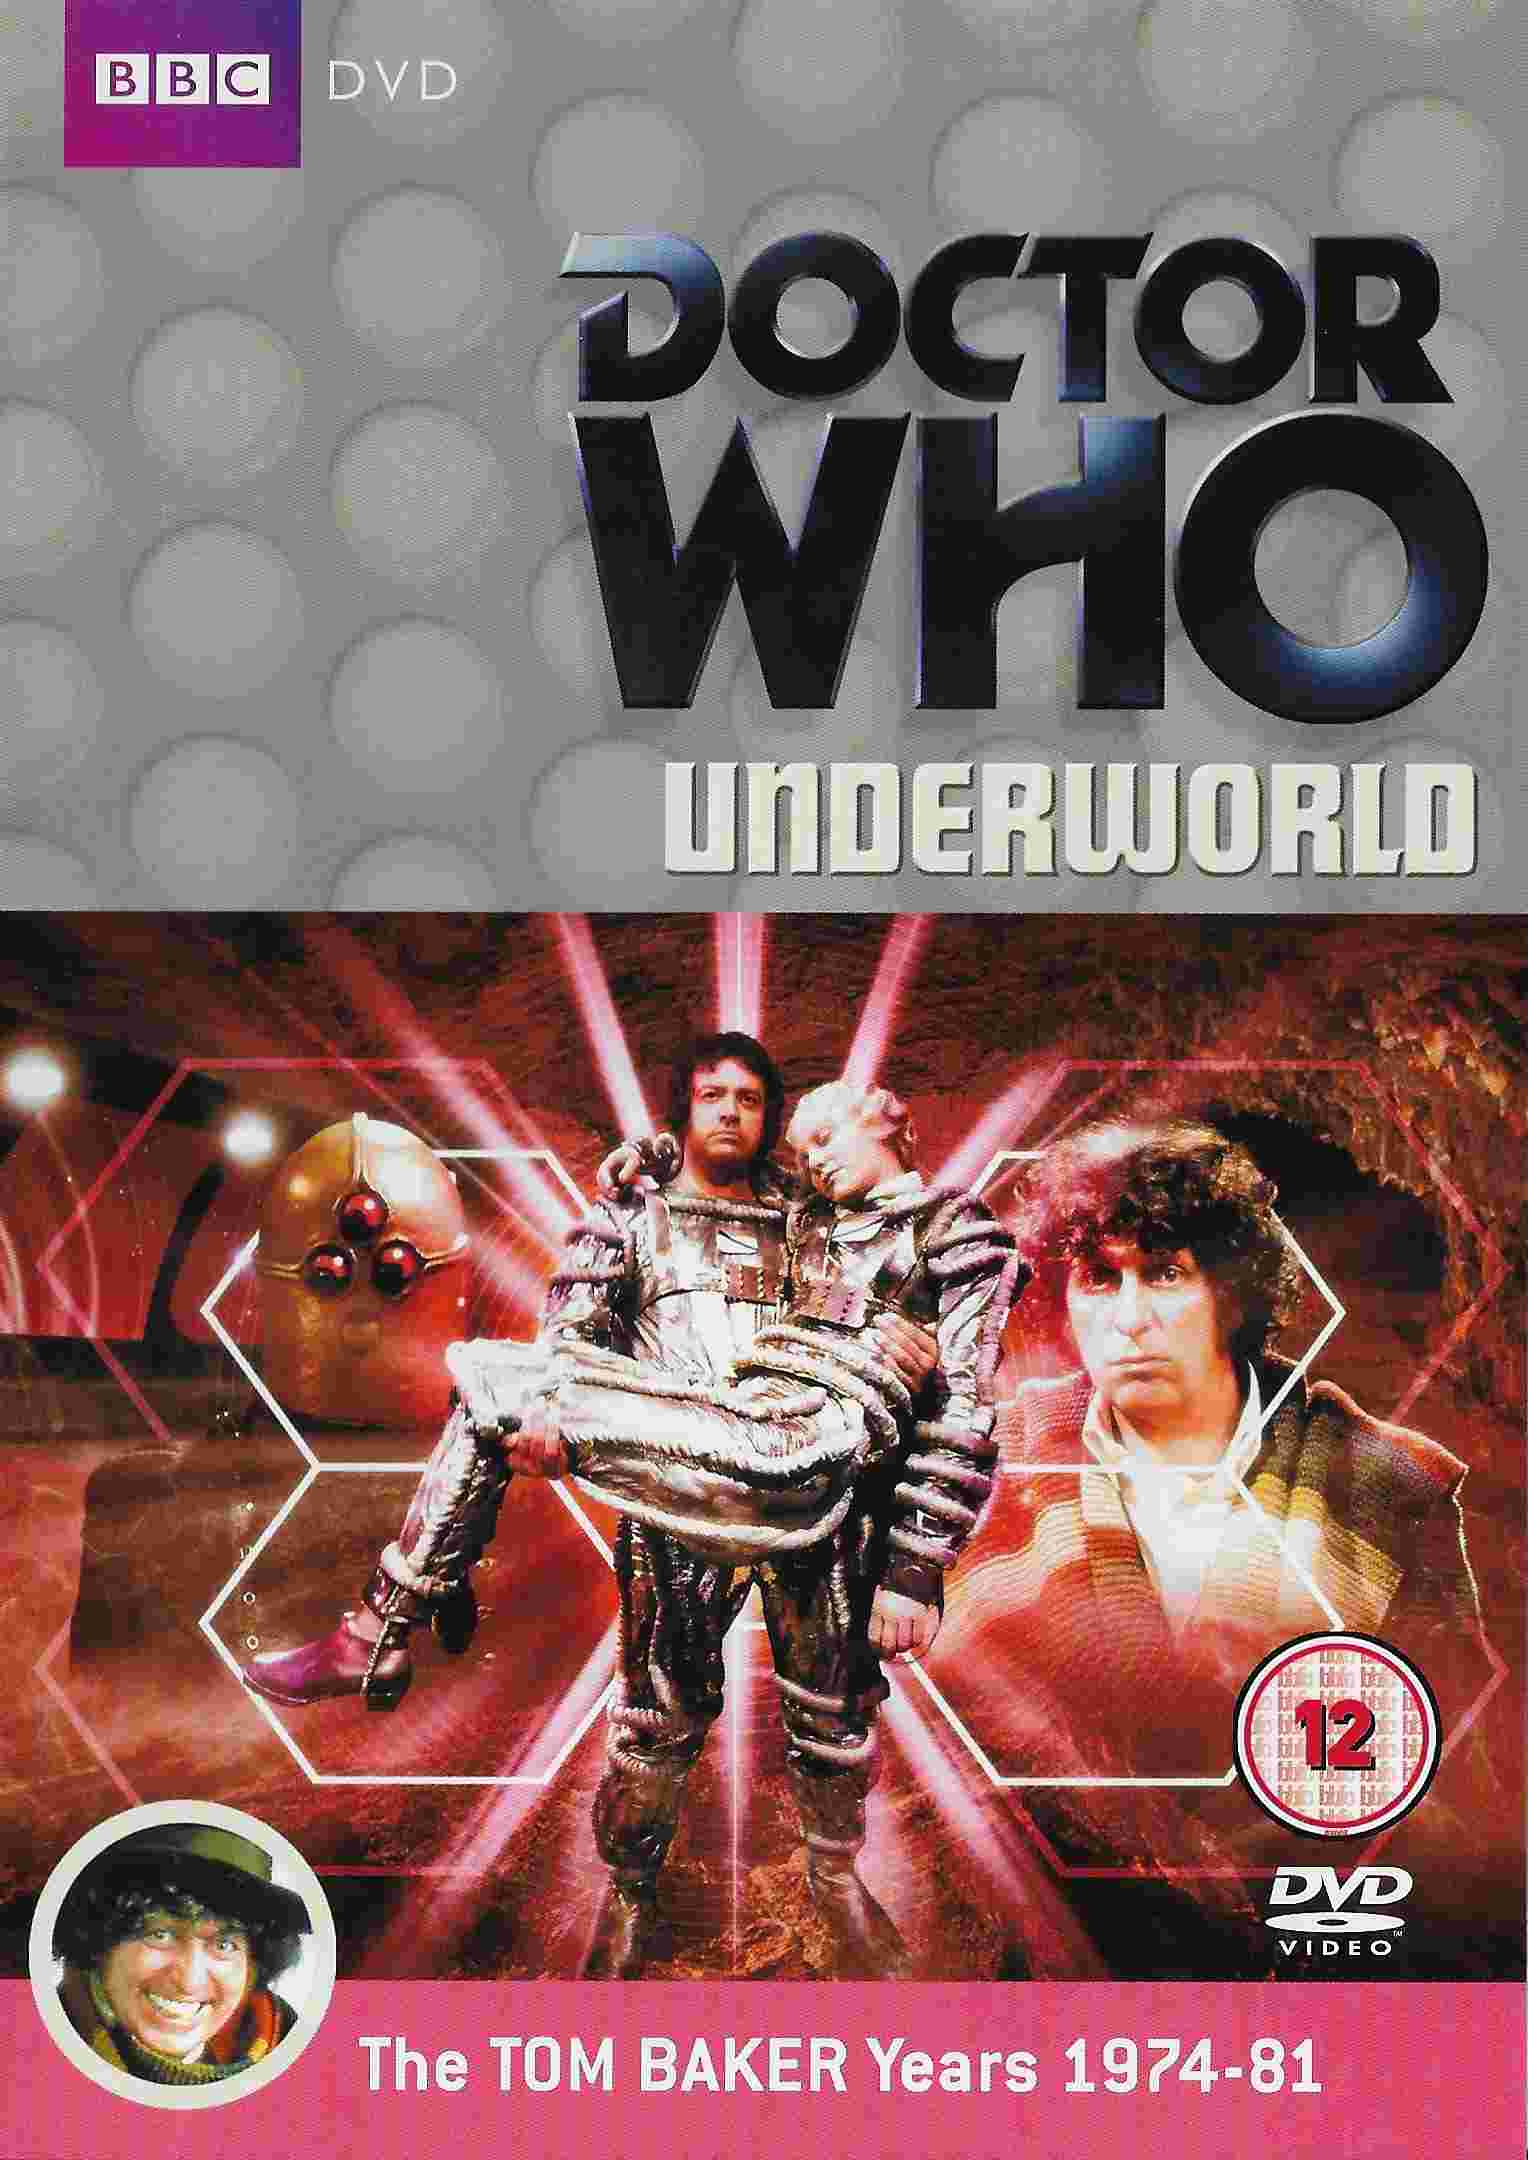 Picture of BBCDVD 2851B Doctor Who - Underworld by artist Bob Baker / Dave Martin from the BBC dvds - Records and Tapes library